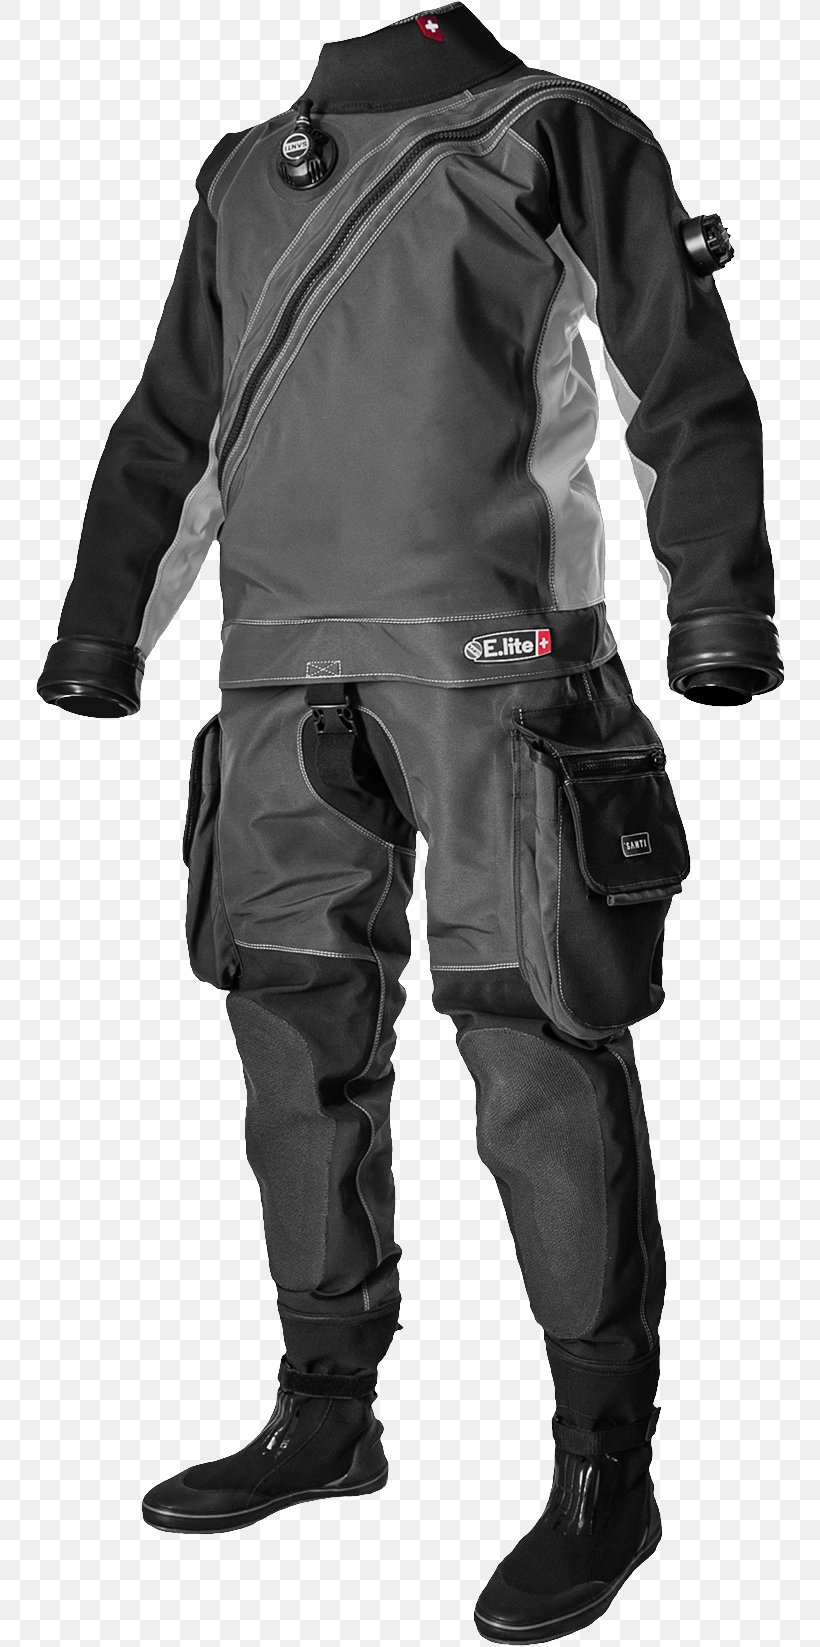 Dry Suit Scuba Diving Underwater Diving Modern Textile Technology, PNG, 750x1647px, Dry Suit, Divemaster, Diving Equipment, Extreme Sport, Jacket Download Free